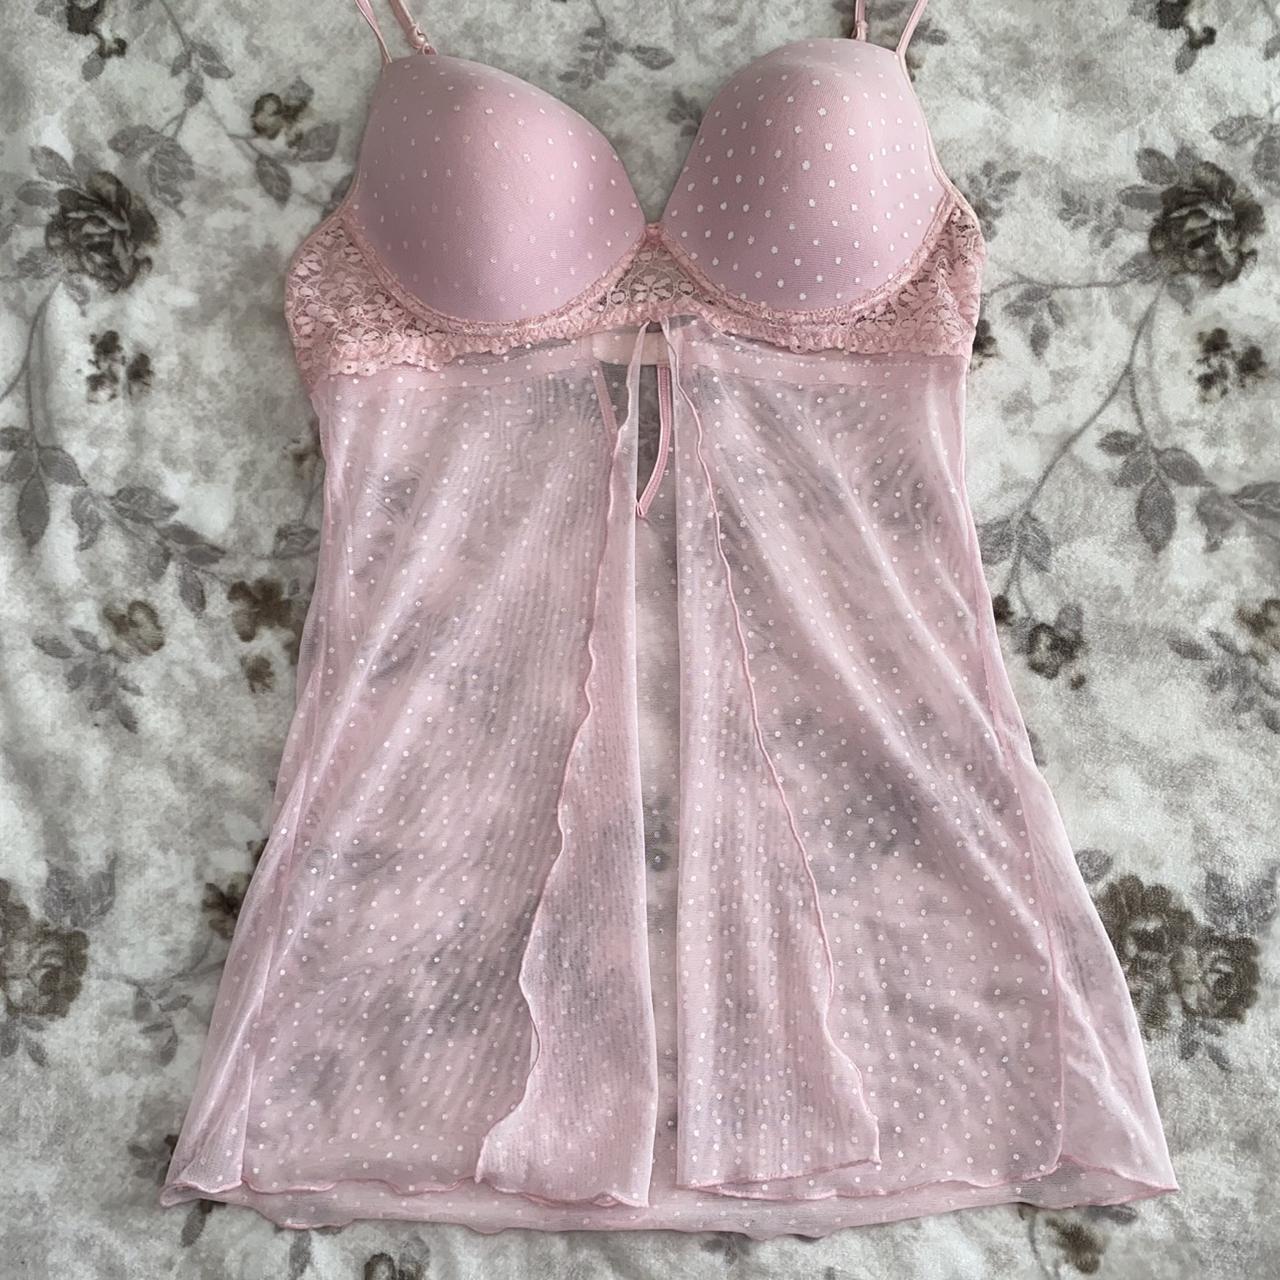 Product Image 2 - Dainty Baby Pink lingerie piece

38C